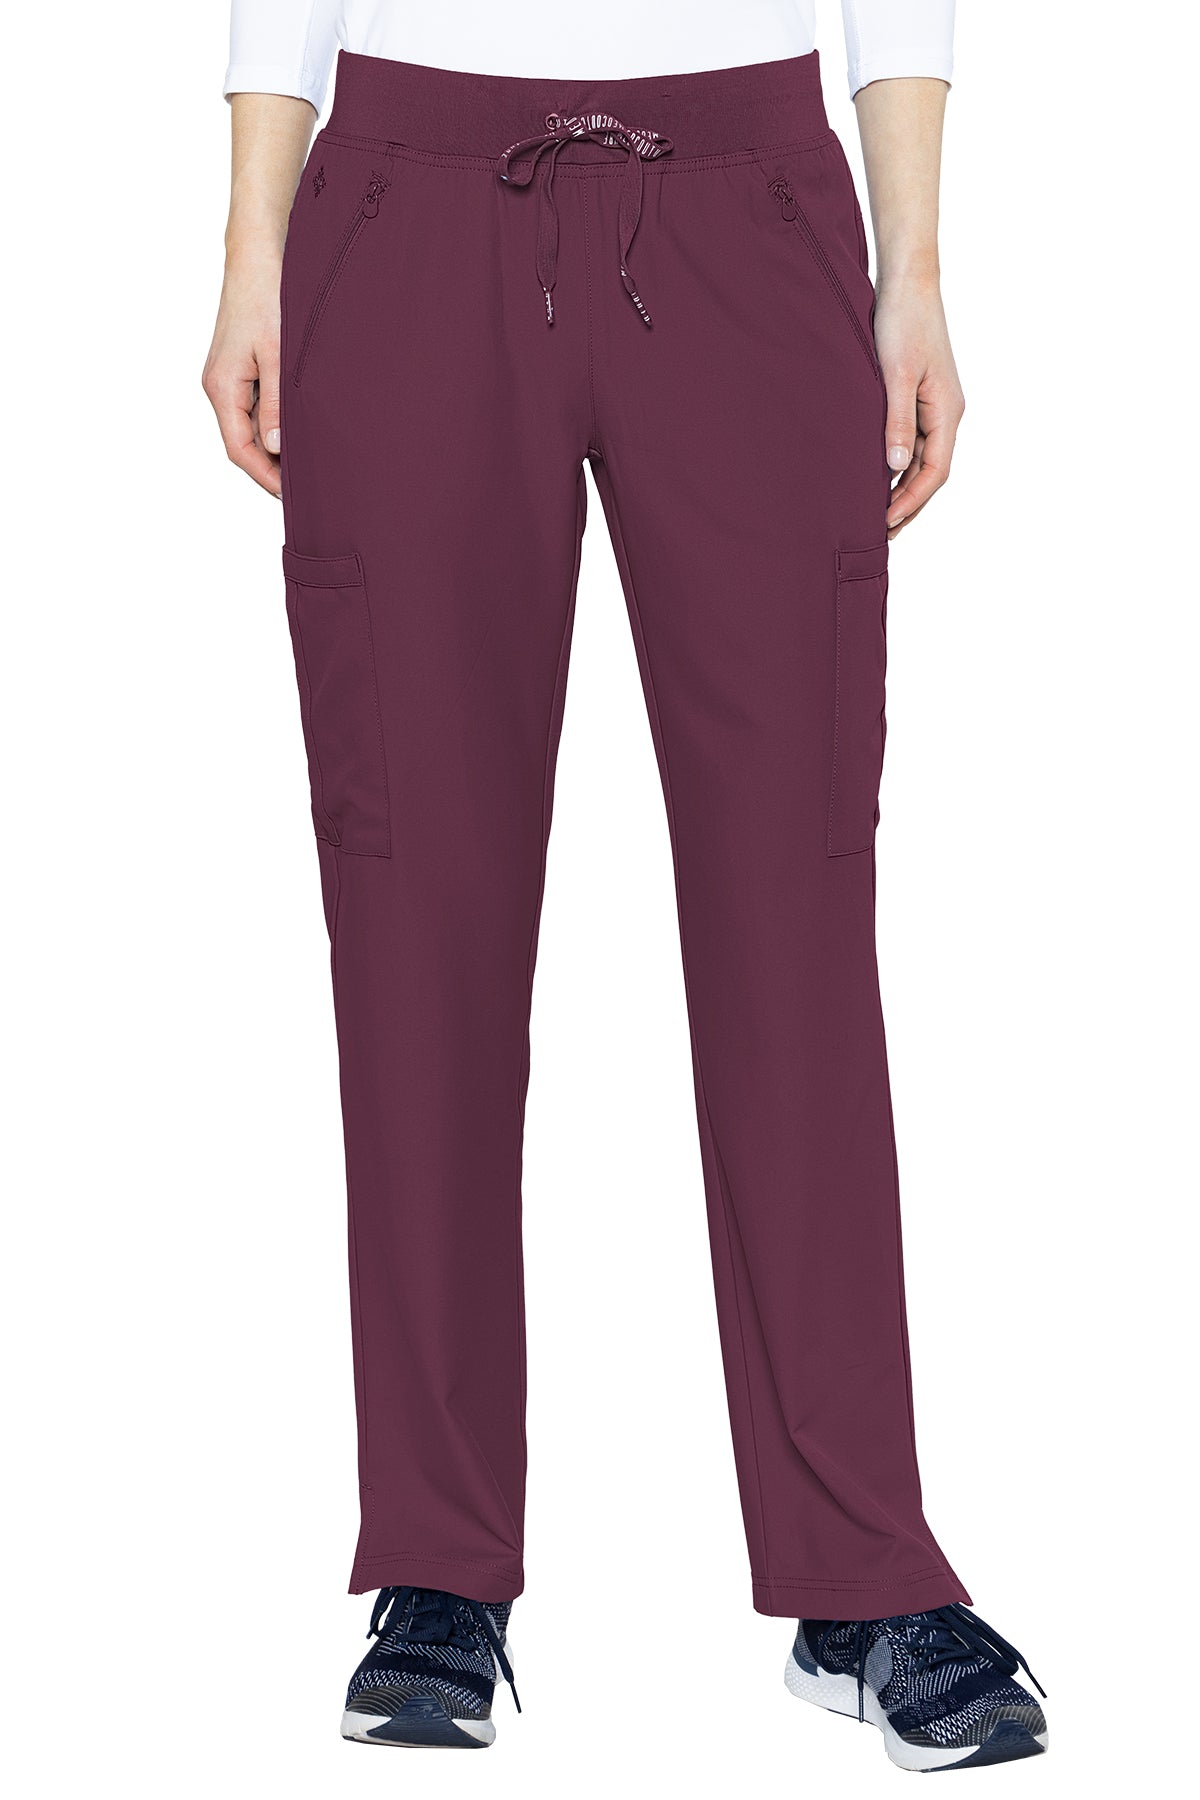 Med Couture 2702 Insight Women's Zipper Pocket Pant - PETITE Wine Front